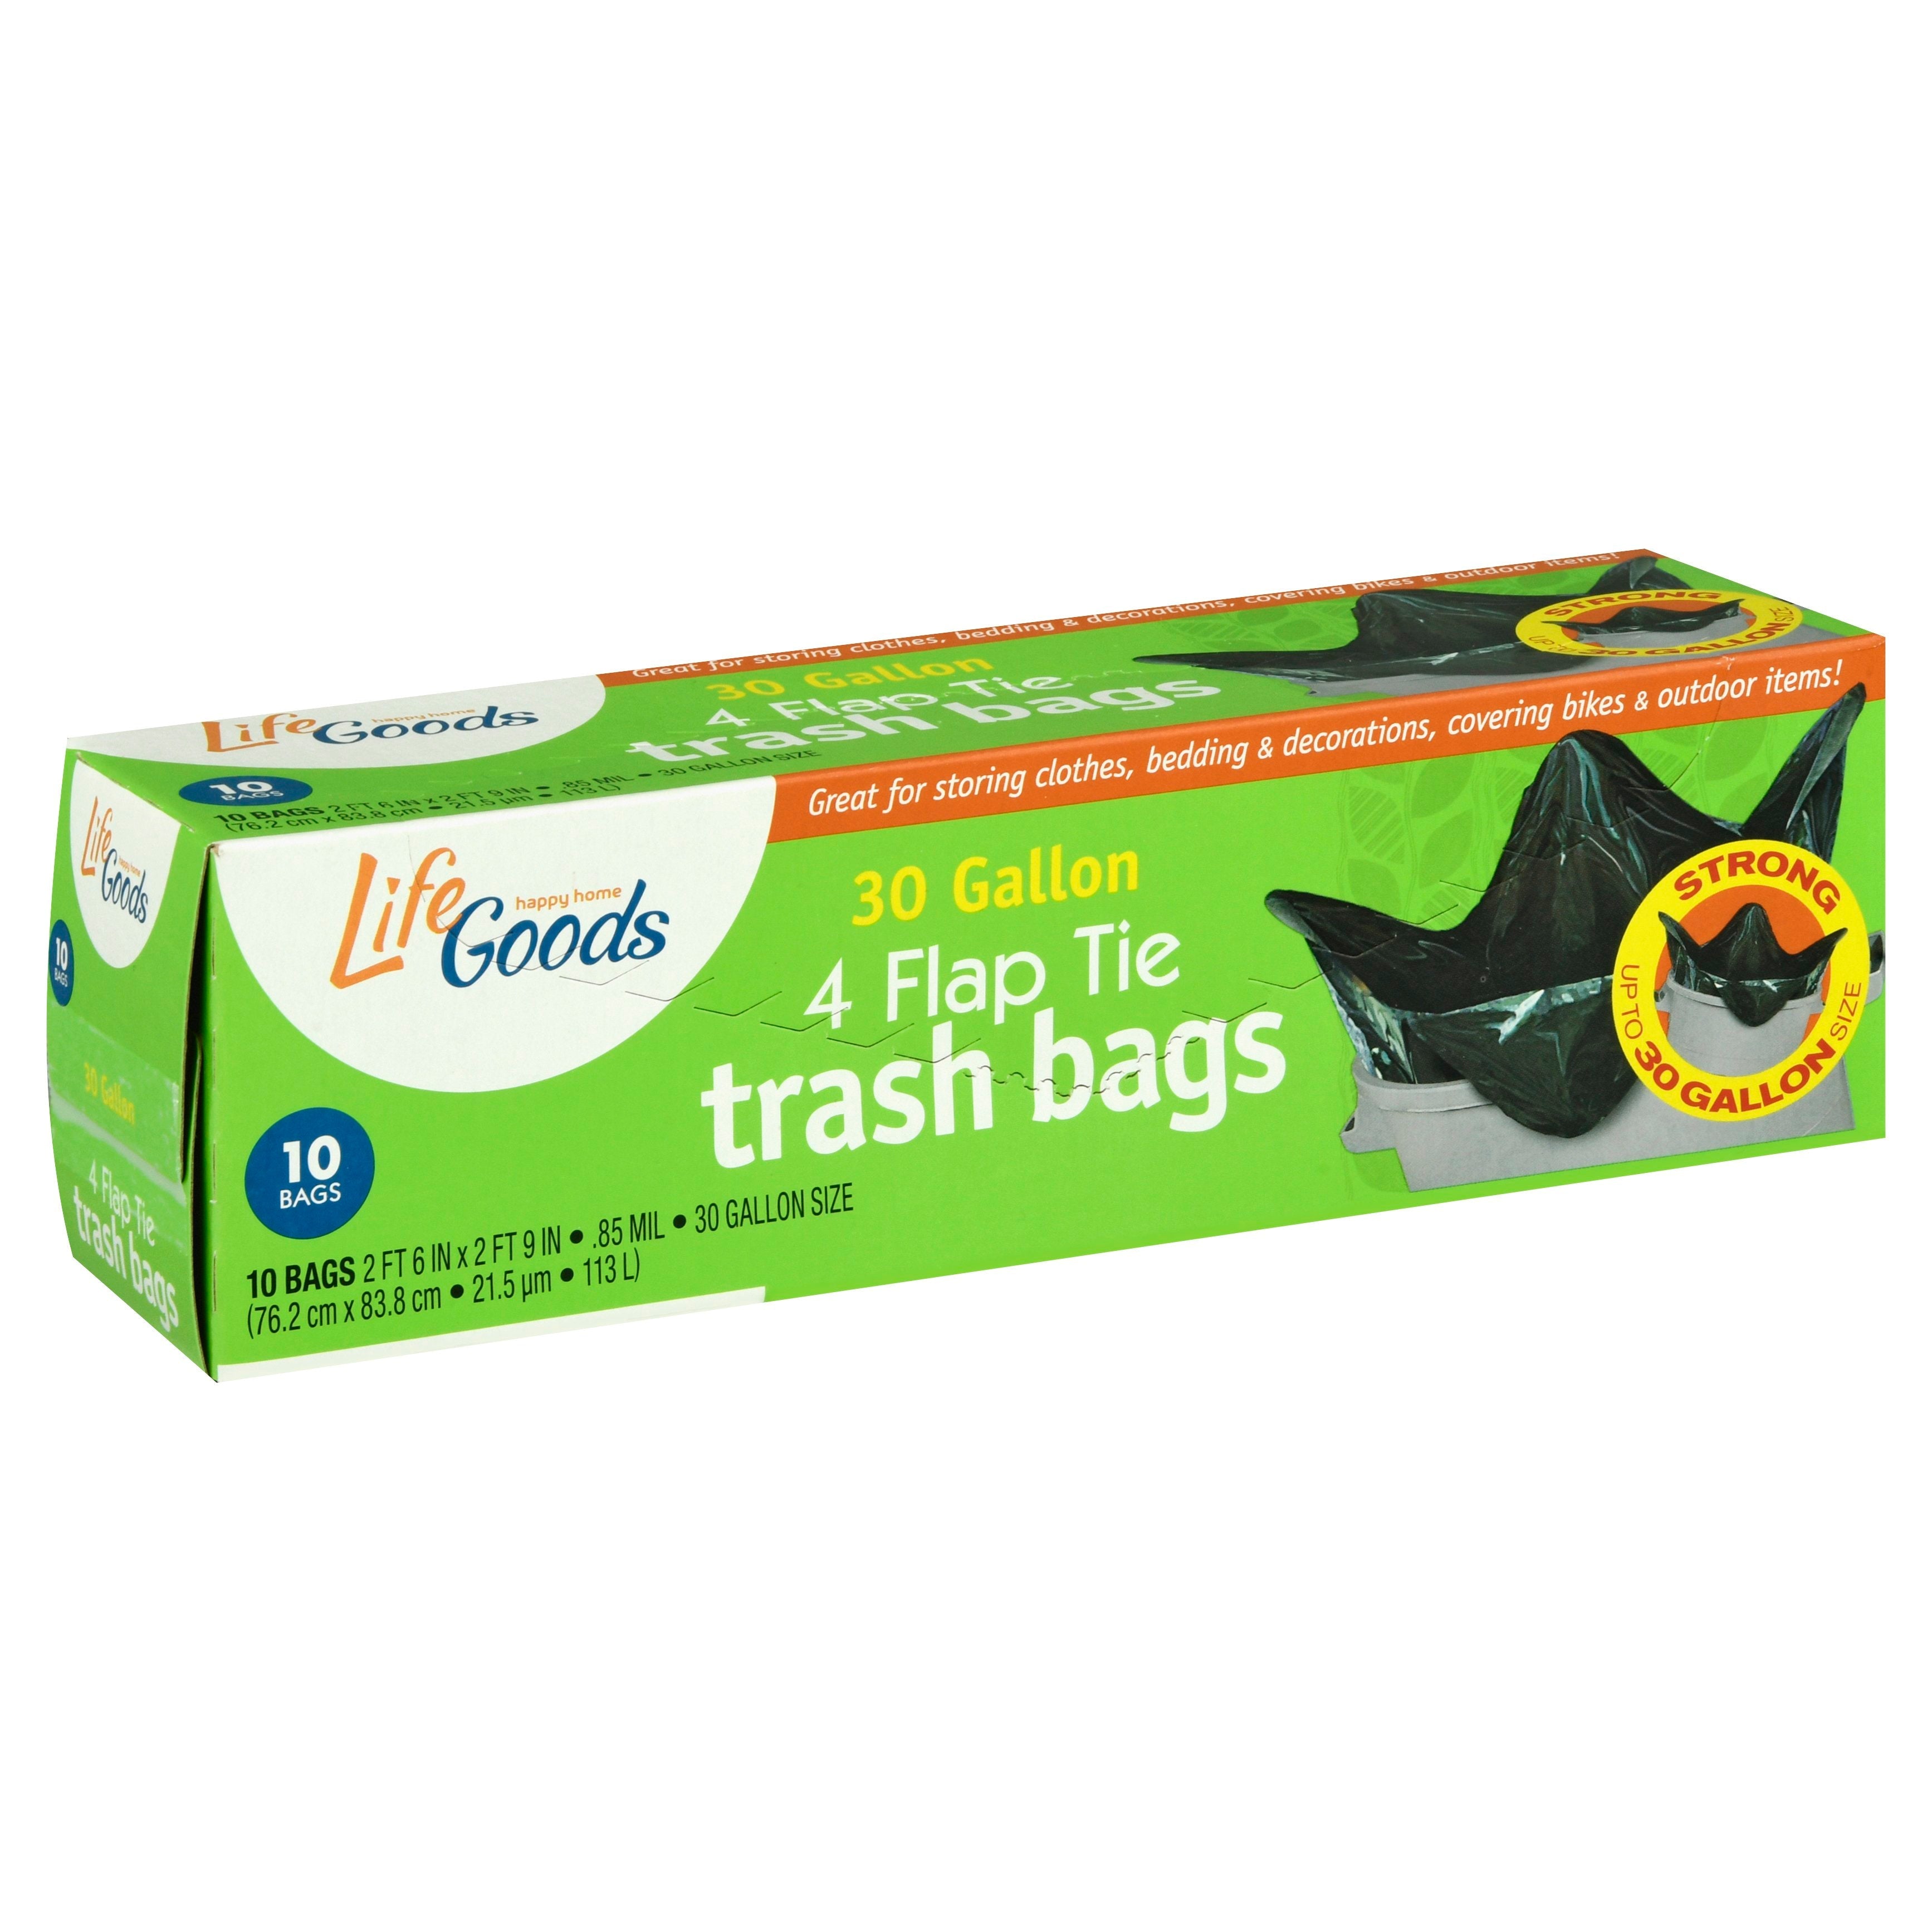 Glad Small Garbage Bags, 4 Gallon 30 bags 